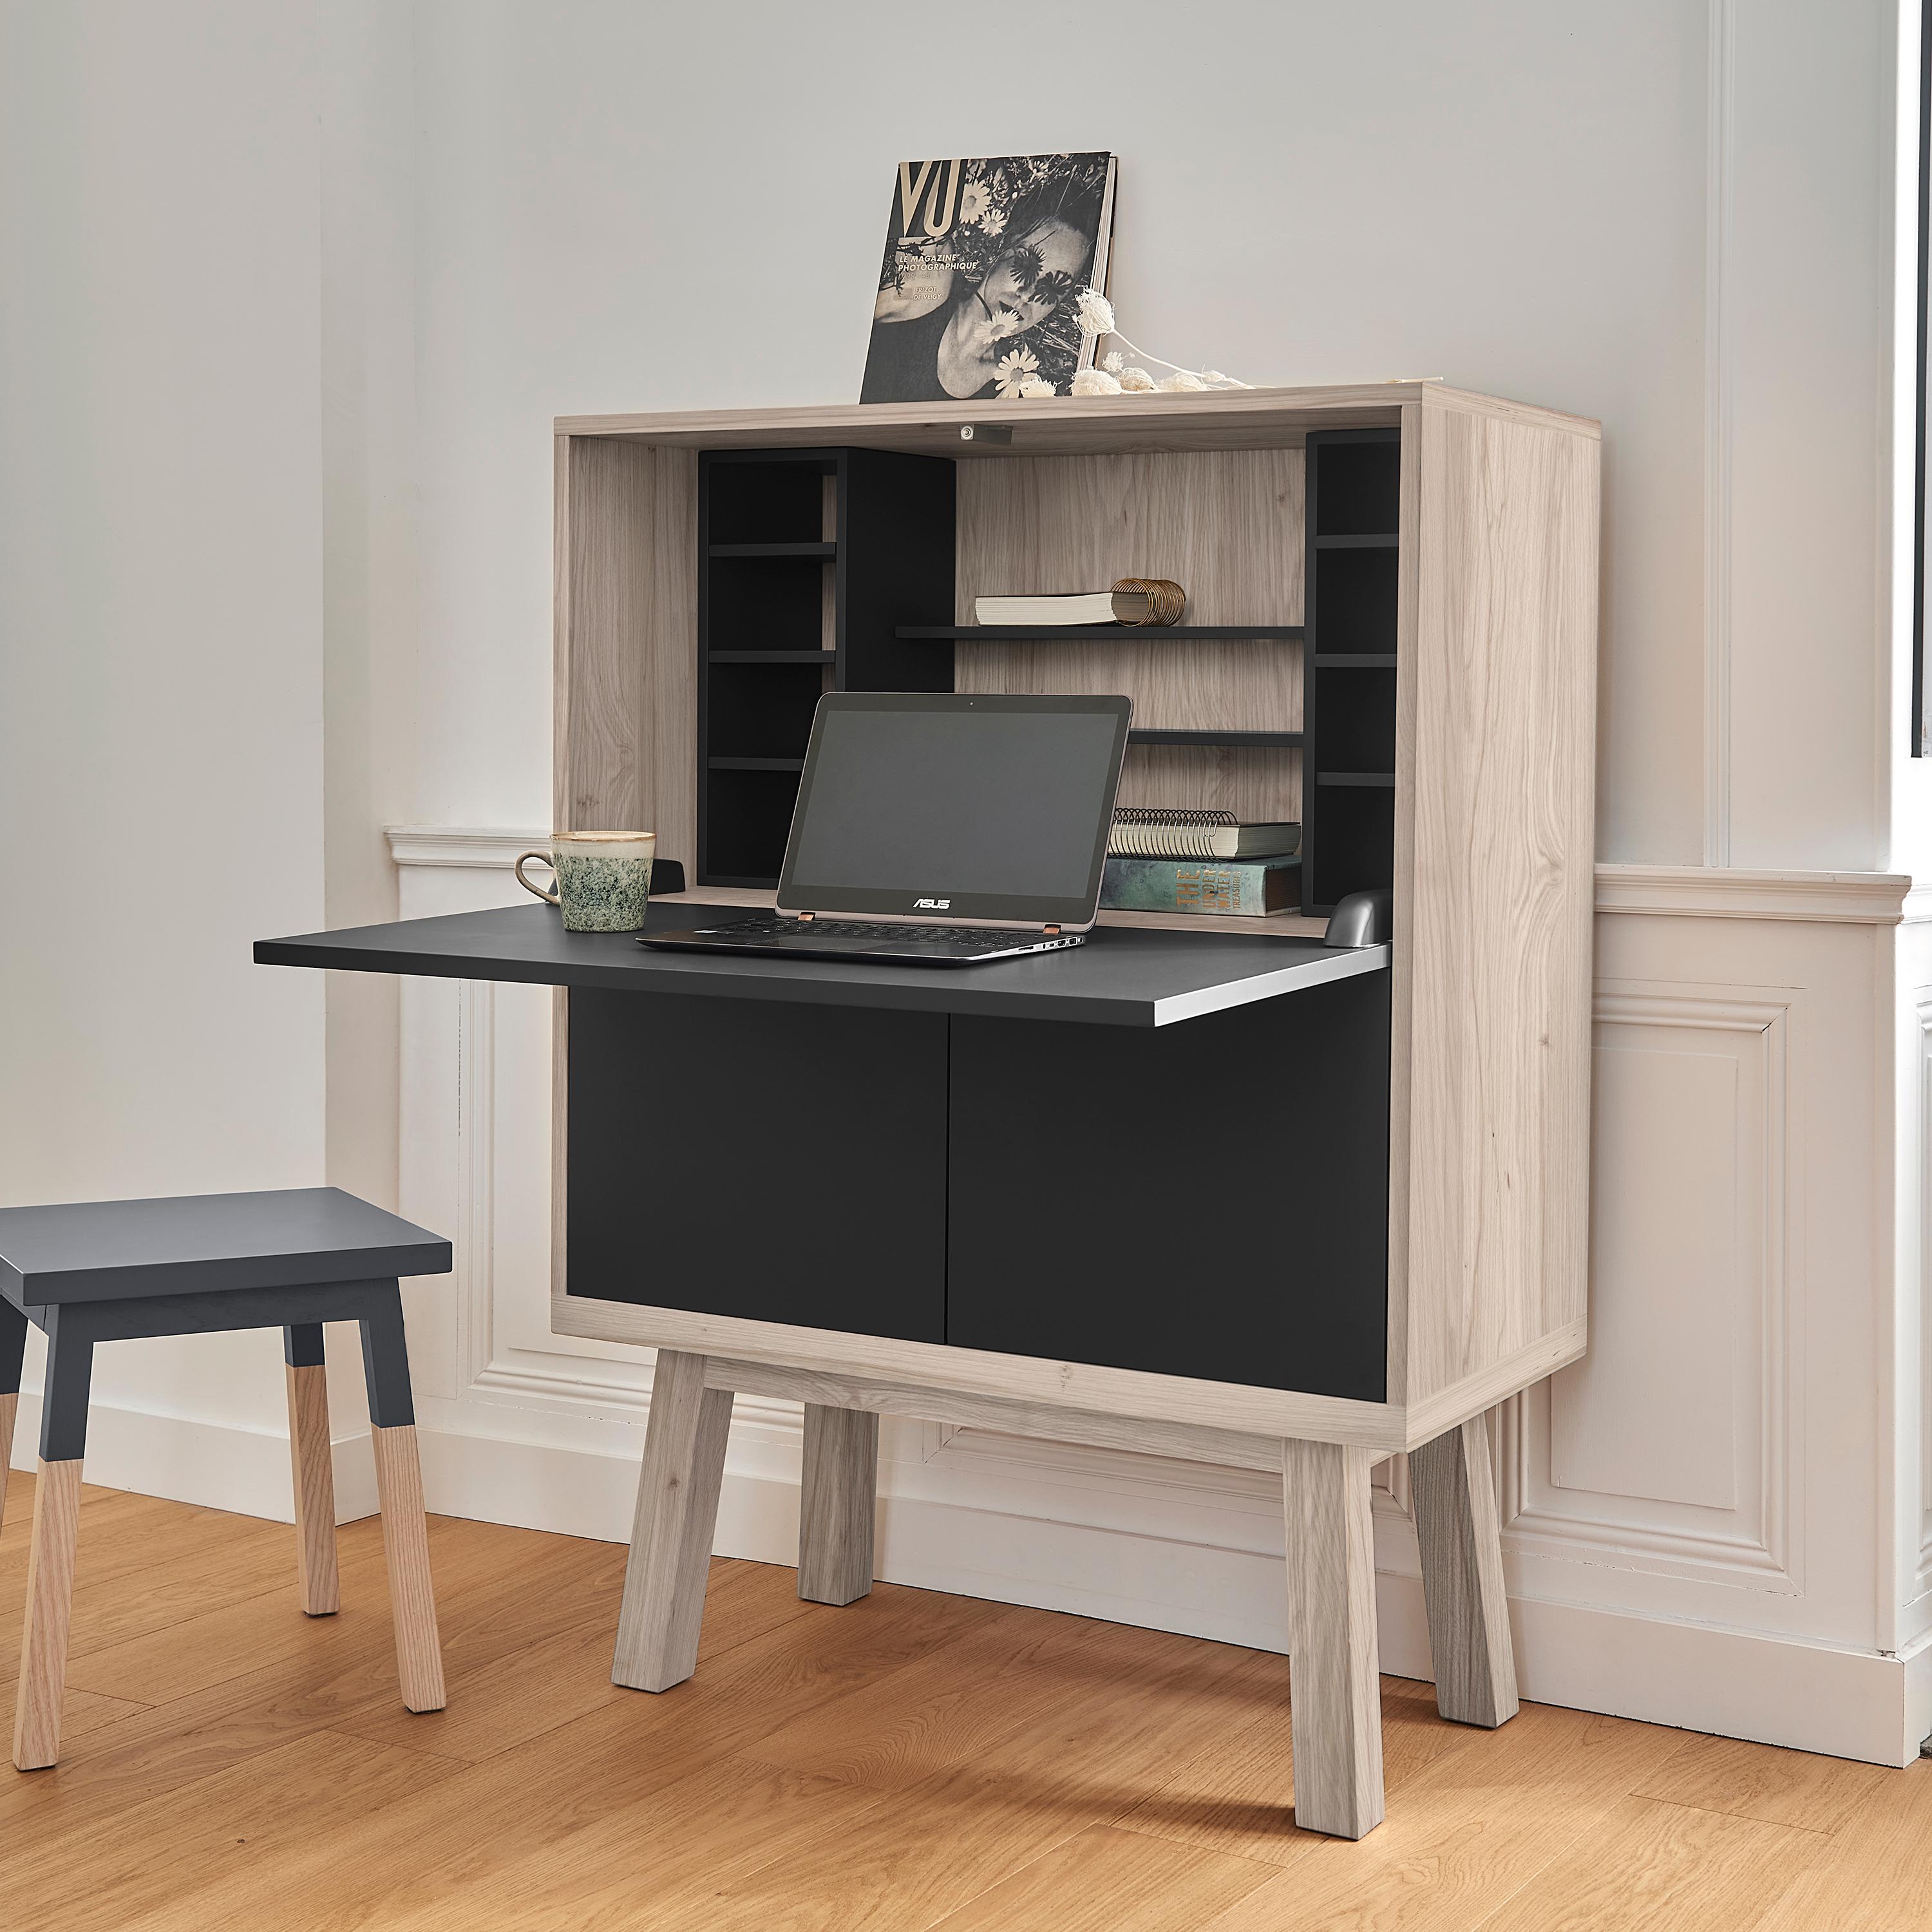 This secretary desk belongs to our ÉGÉE COLLECTION designed by the Parisian designer Eric Gizard. 

Eric adopts for this collection the refined codes of Scandinavian design, combining natural materials and sobriety of lines and adds very beautiful